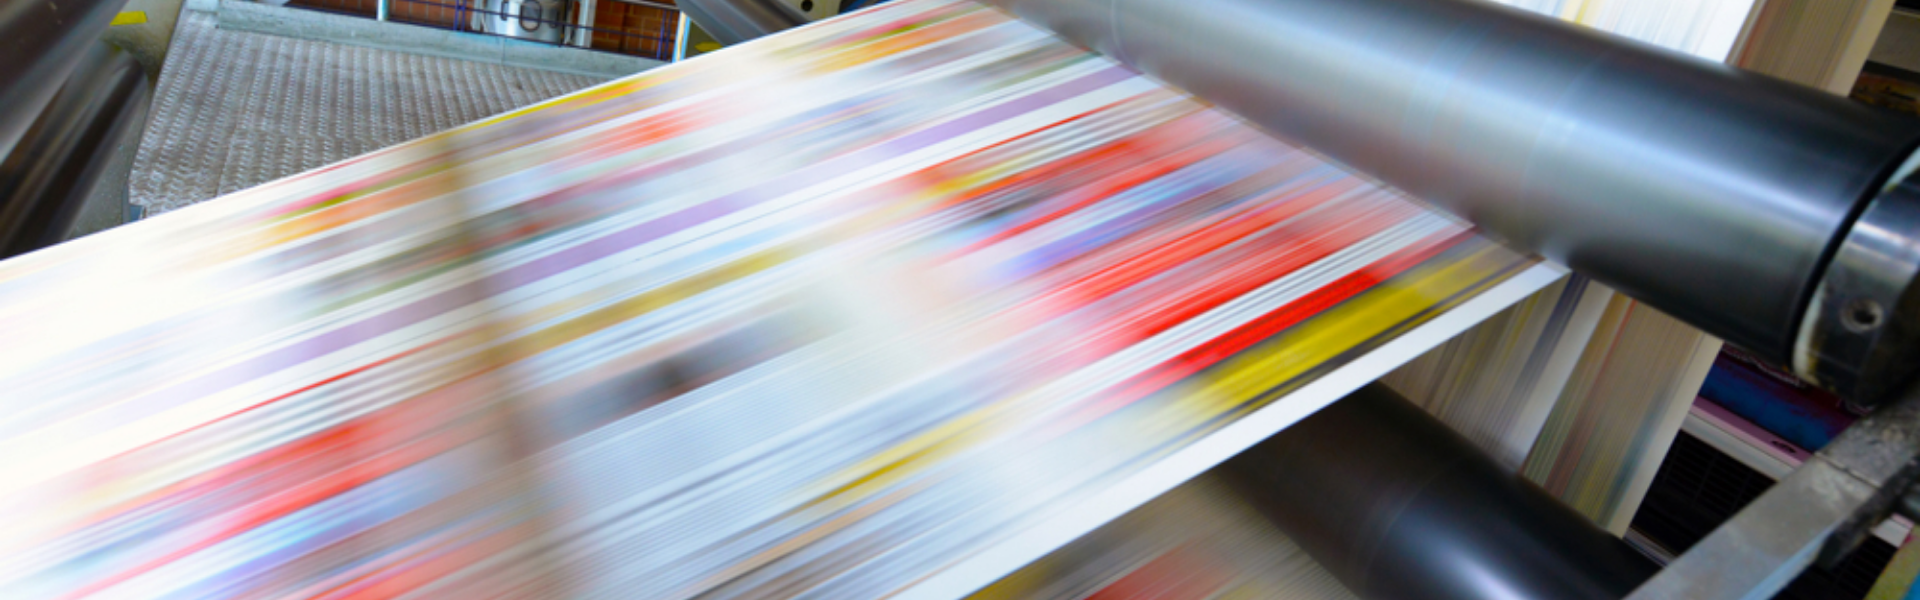 Rise of E-Books Challenges Printing Press Industry to Adapt